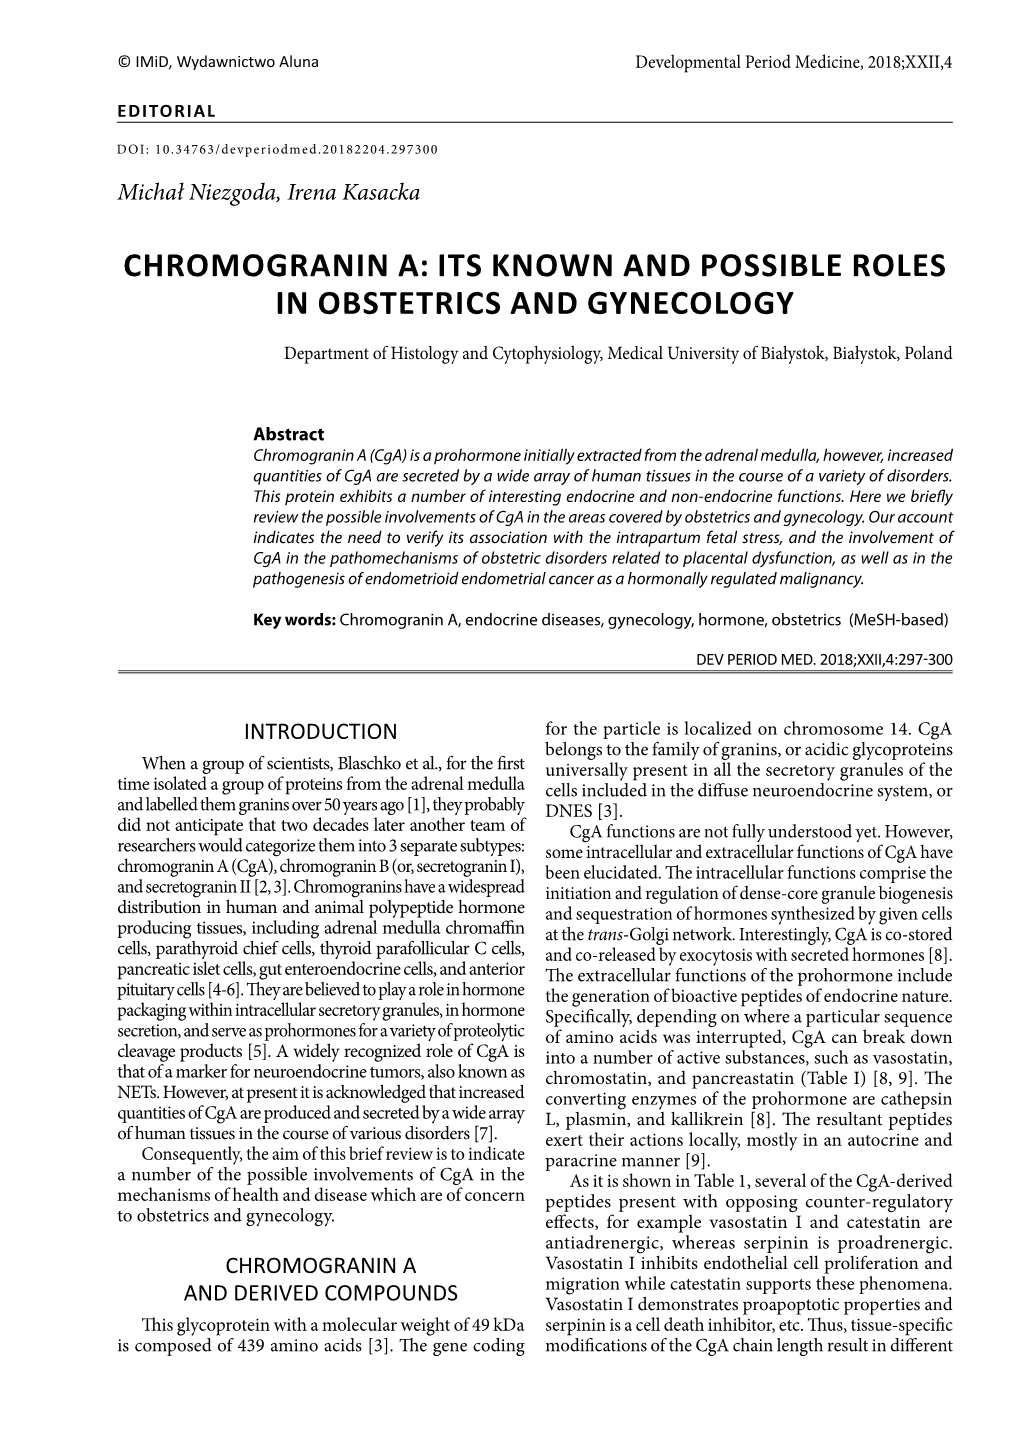 Chromogranin A: Its Known and Possible Roles in Obstetrics and Gynecology